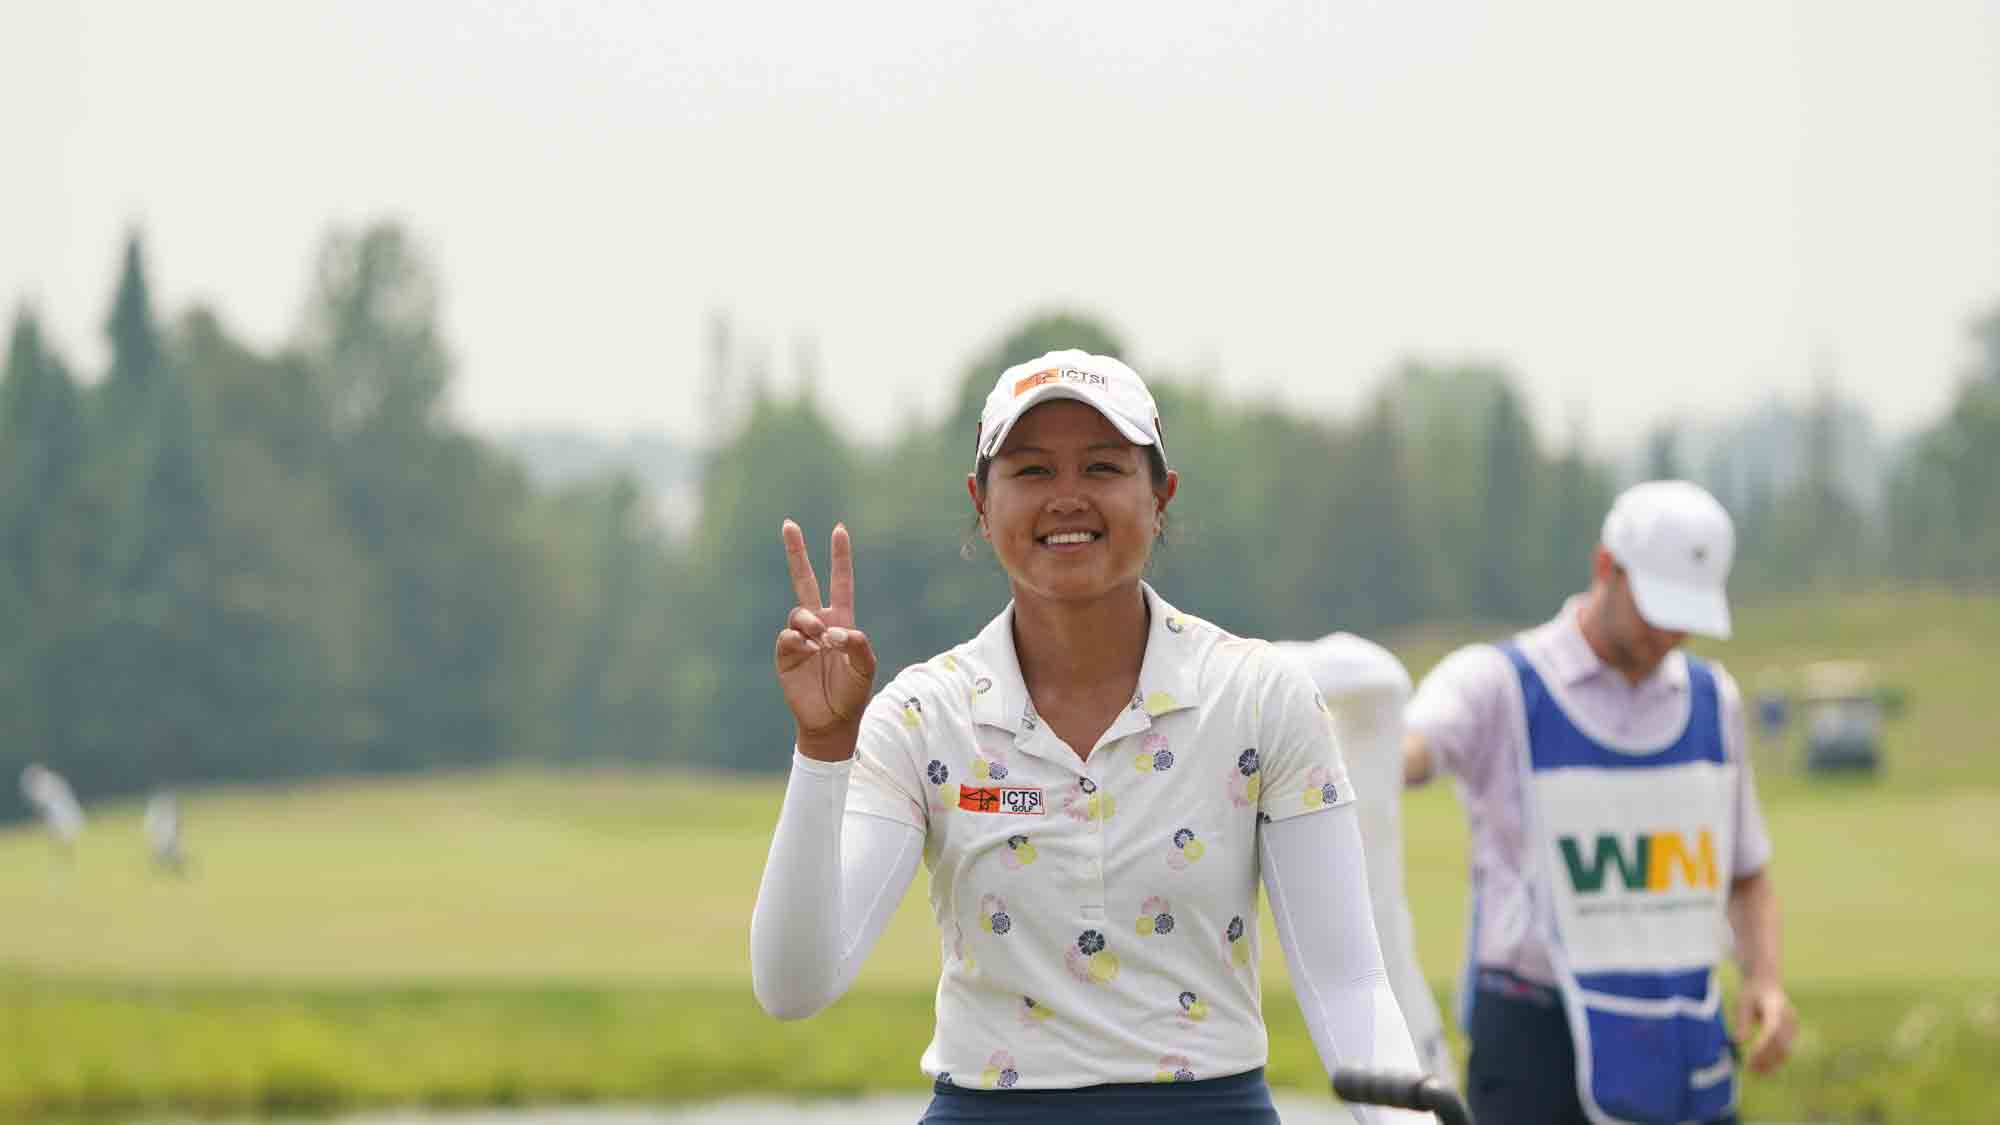 Abegail Arevalo during the second round of the Island Resort Championship